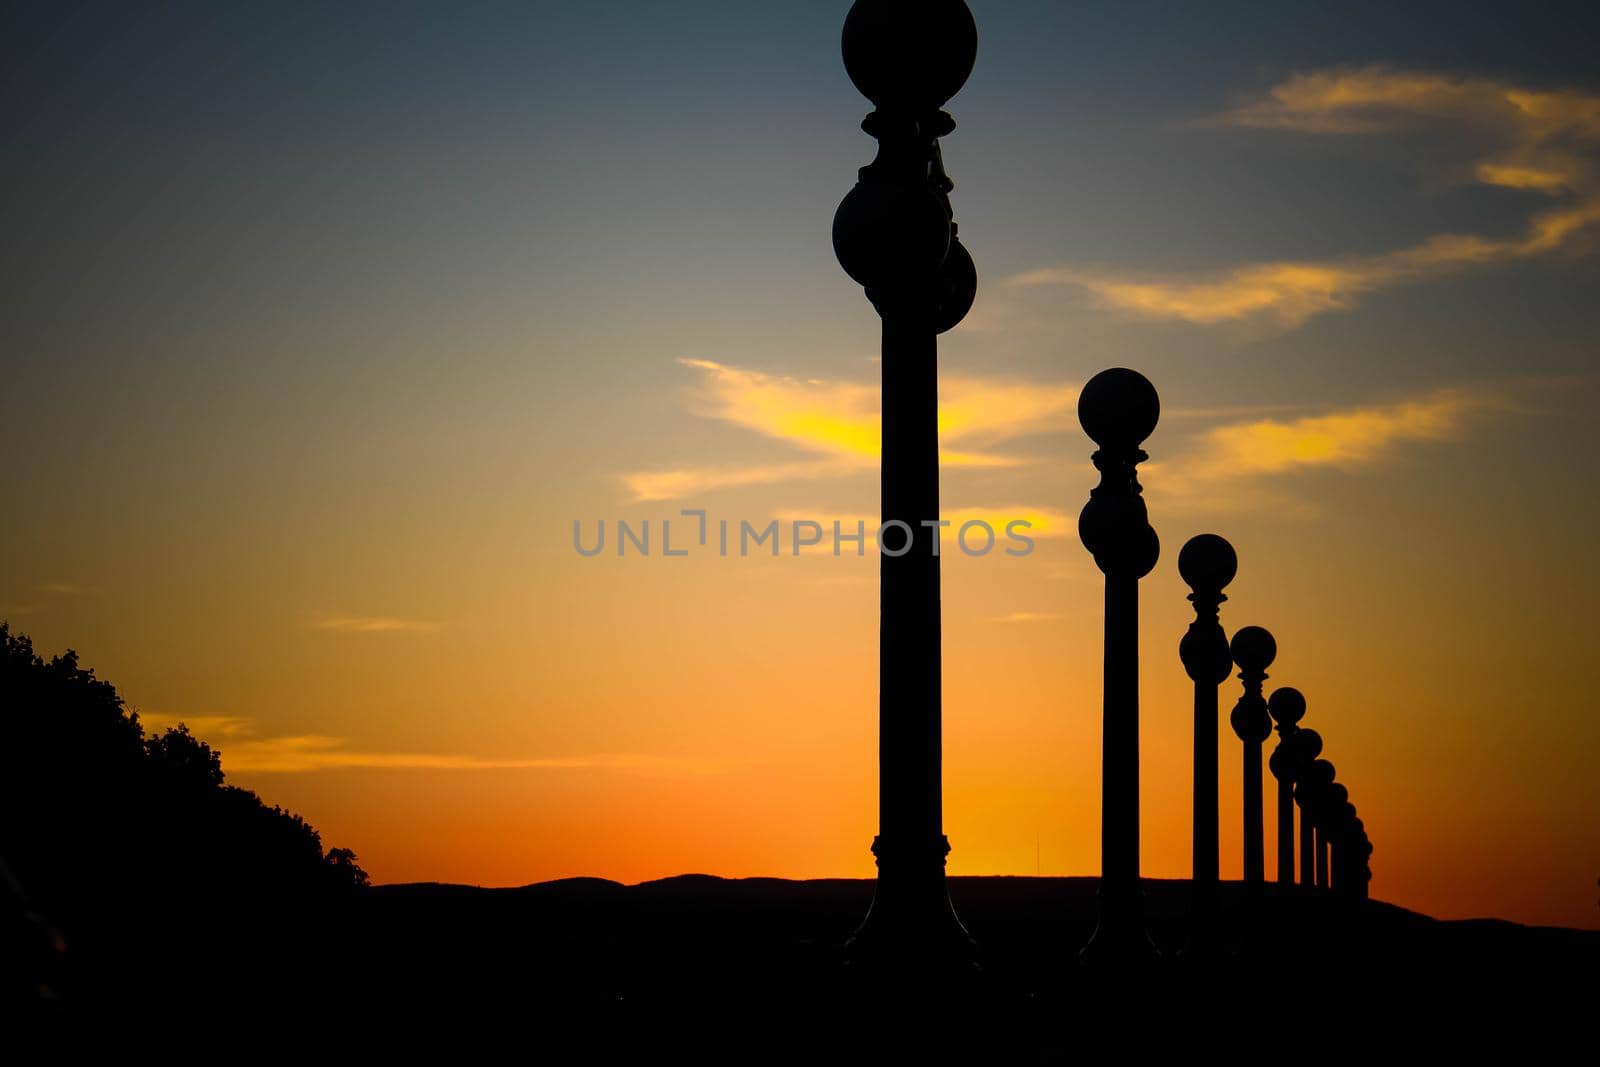 Silhouette of street lanterns with sunset sky. Silhouette of a street lamp post during a beautiful sunset. by JuliaDorian